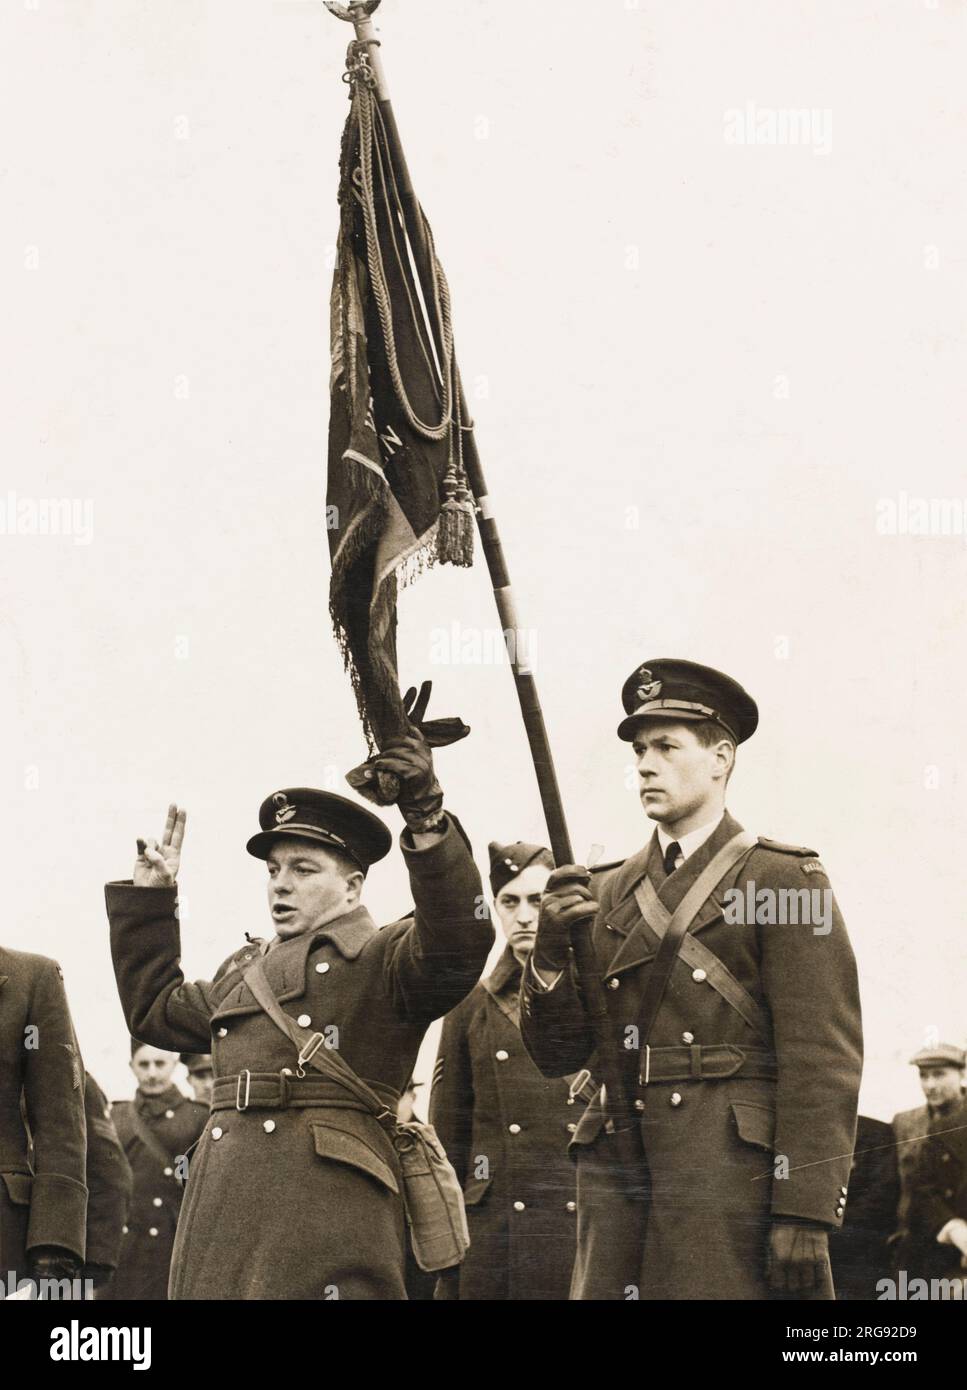 Two unnamed men risked their lives in a daring exploit to stand on the tarmac of an English aerodrome to salute the Belgian air force flag, a symbol of free men. The flag was given by the King of the Belgians to the Belgian Air Force, but when the Allied lines broke in 1940, German orders were to burn the flag. Disobeying orders, Air Force officers stuffed the flag into a shell case and buried it in the woods, where it was later retrieved by an observer in the Belgian Air Force. Stock Photo